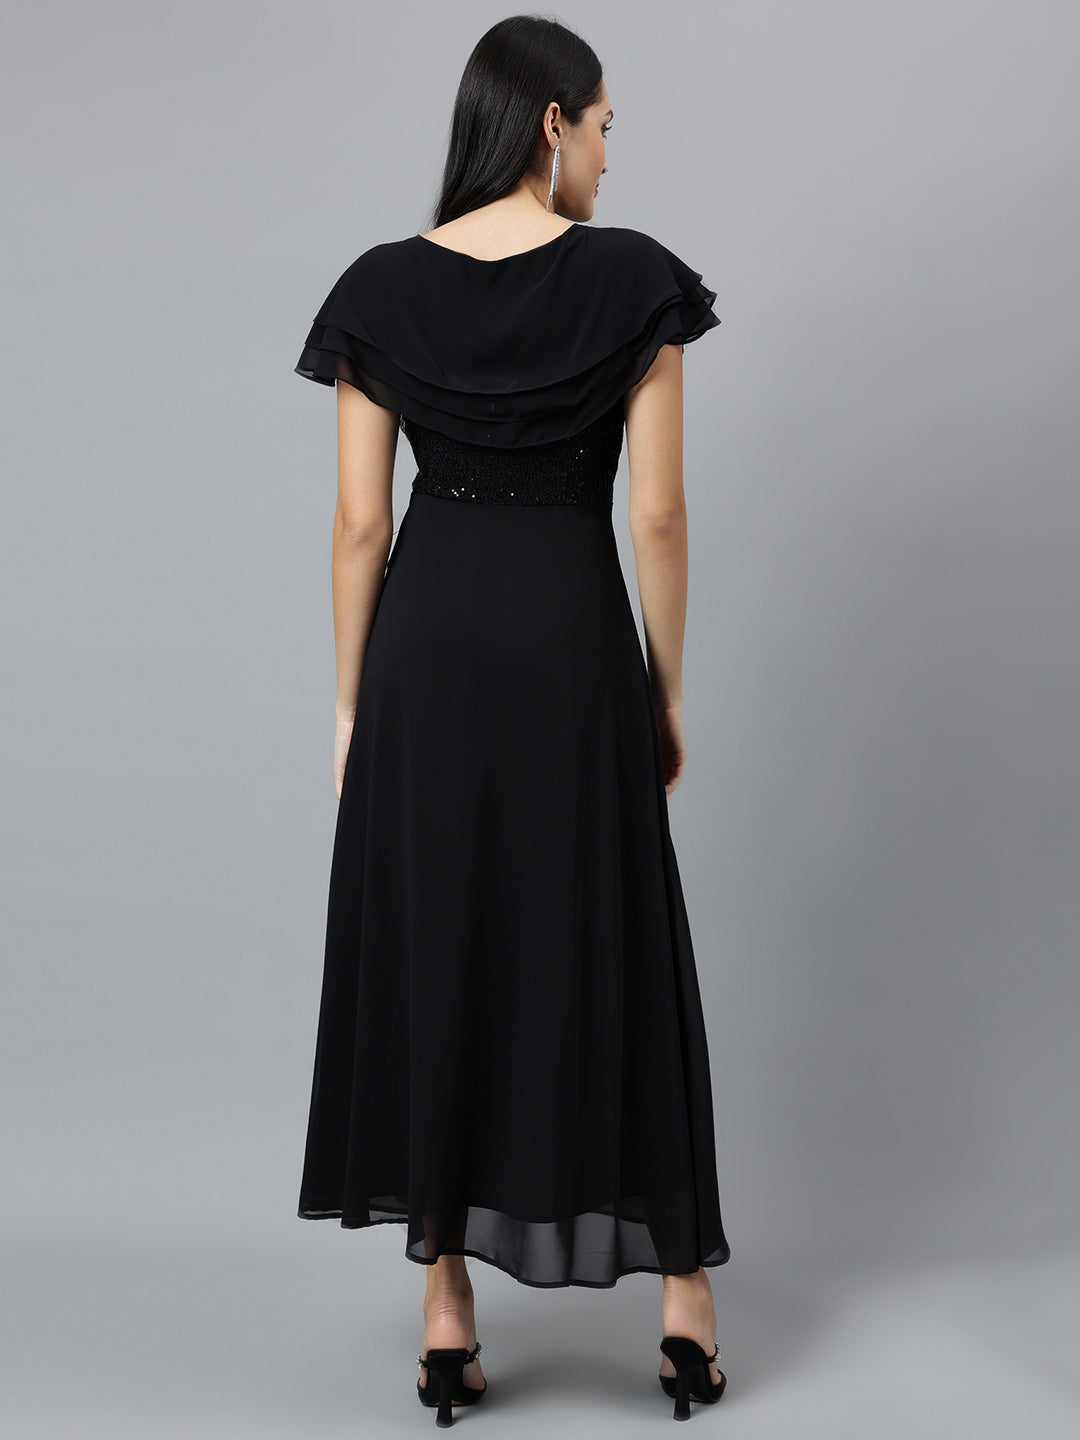 Black Solid Cap Sleeves Party Dress